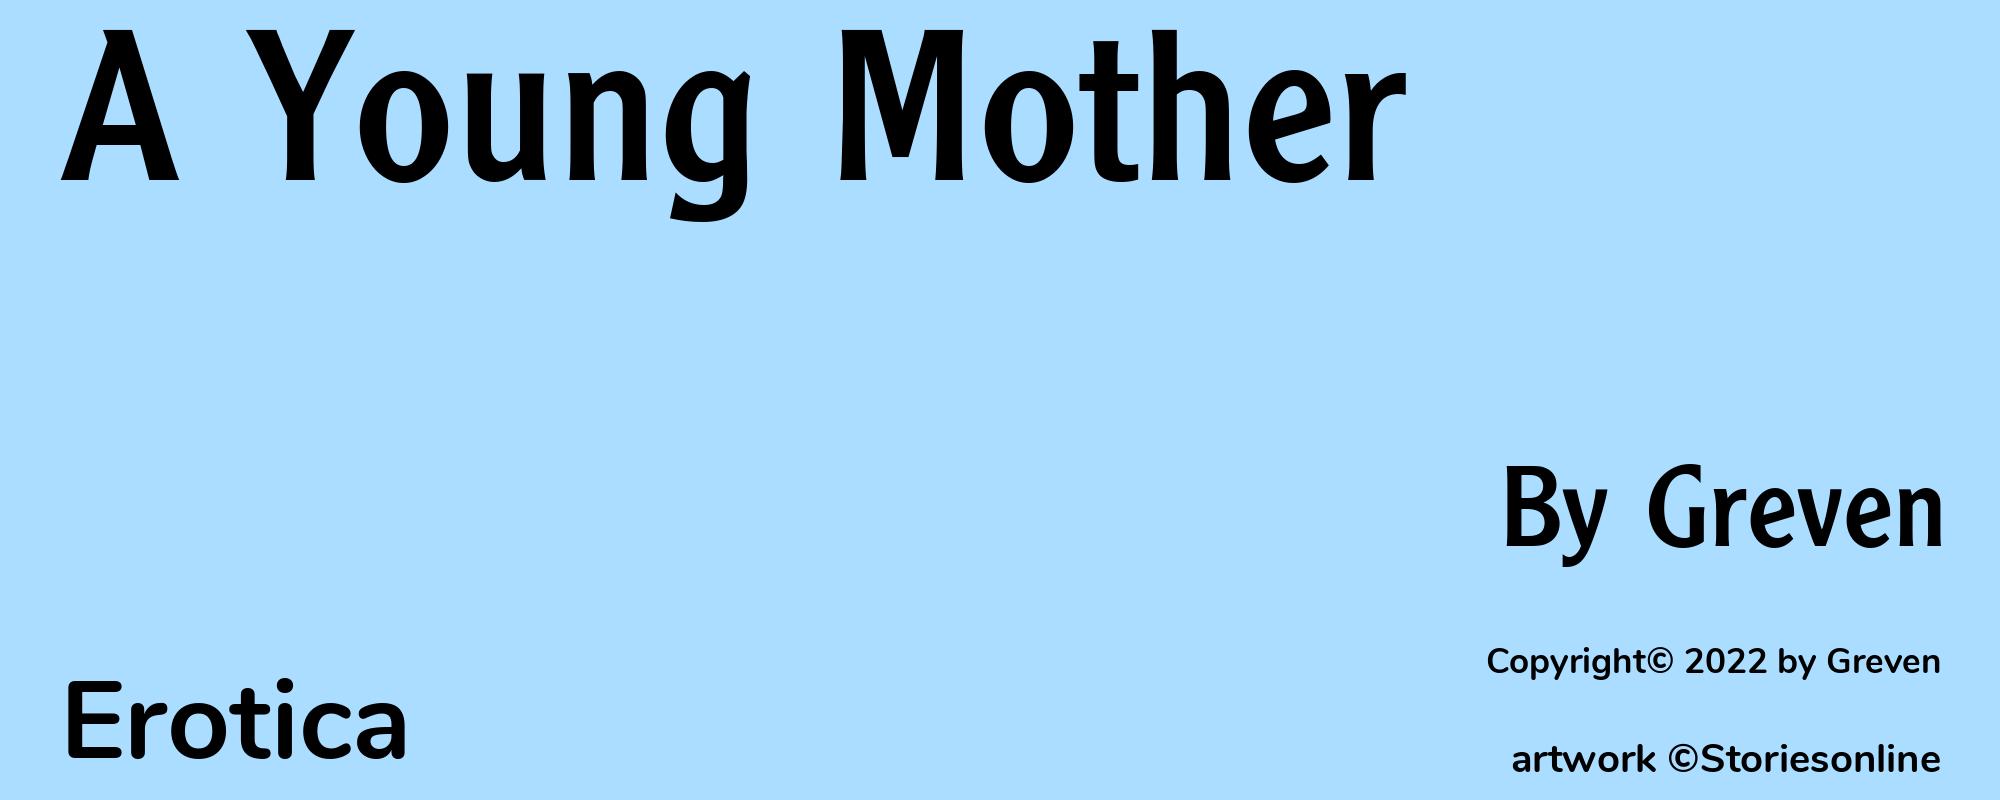 A Young Mother - Cover